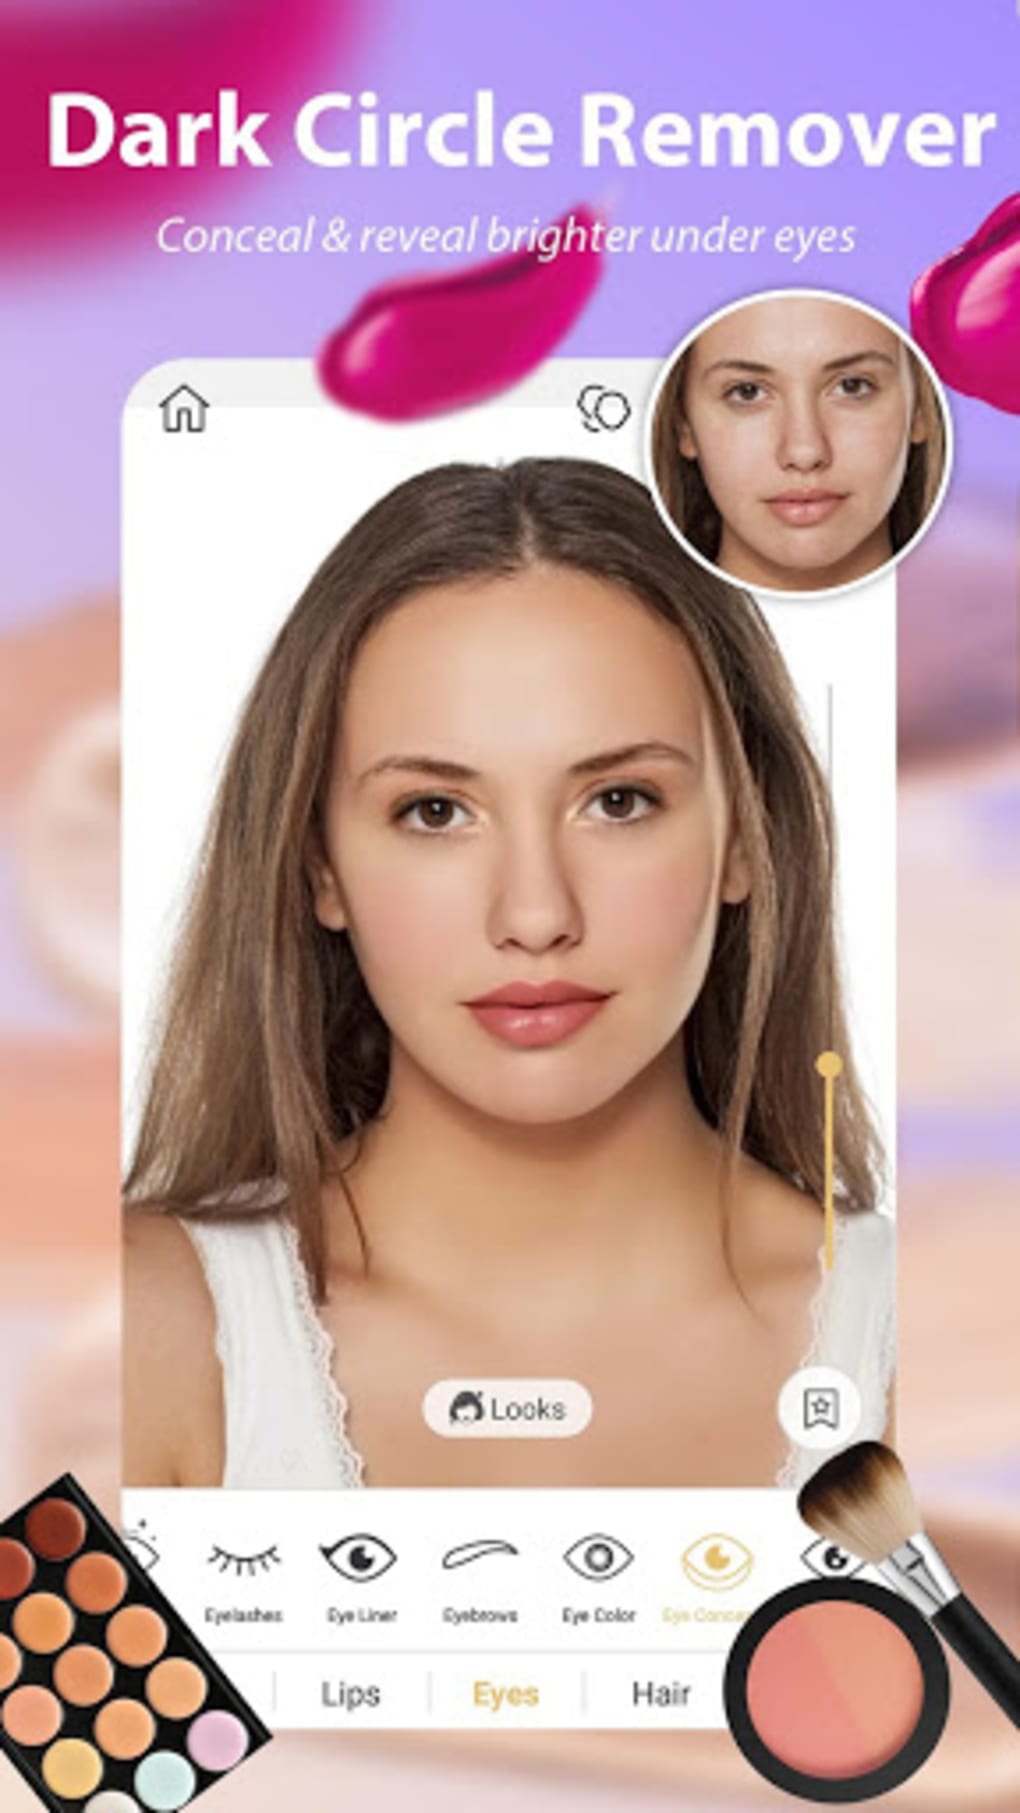 perfect365 for android